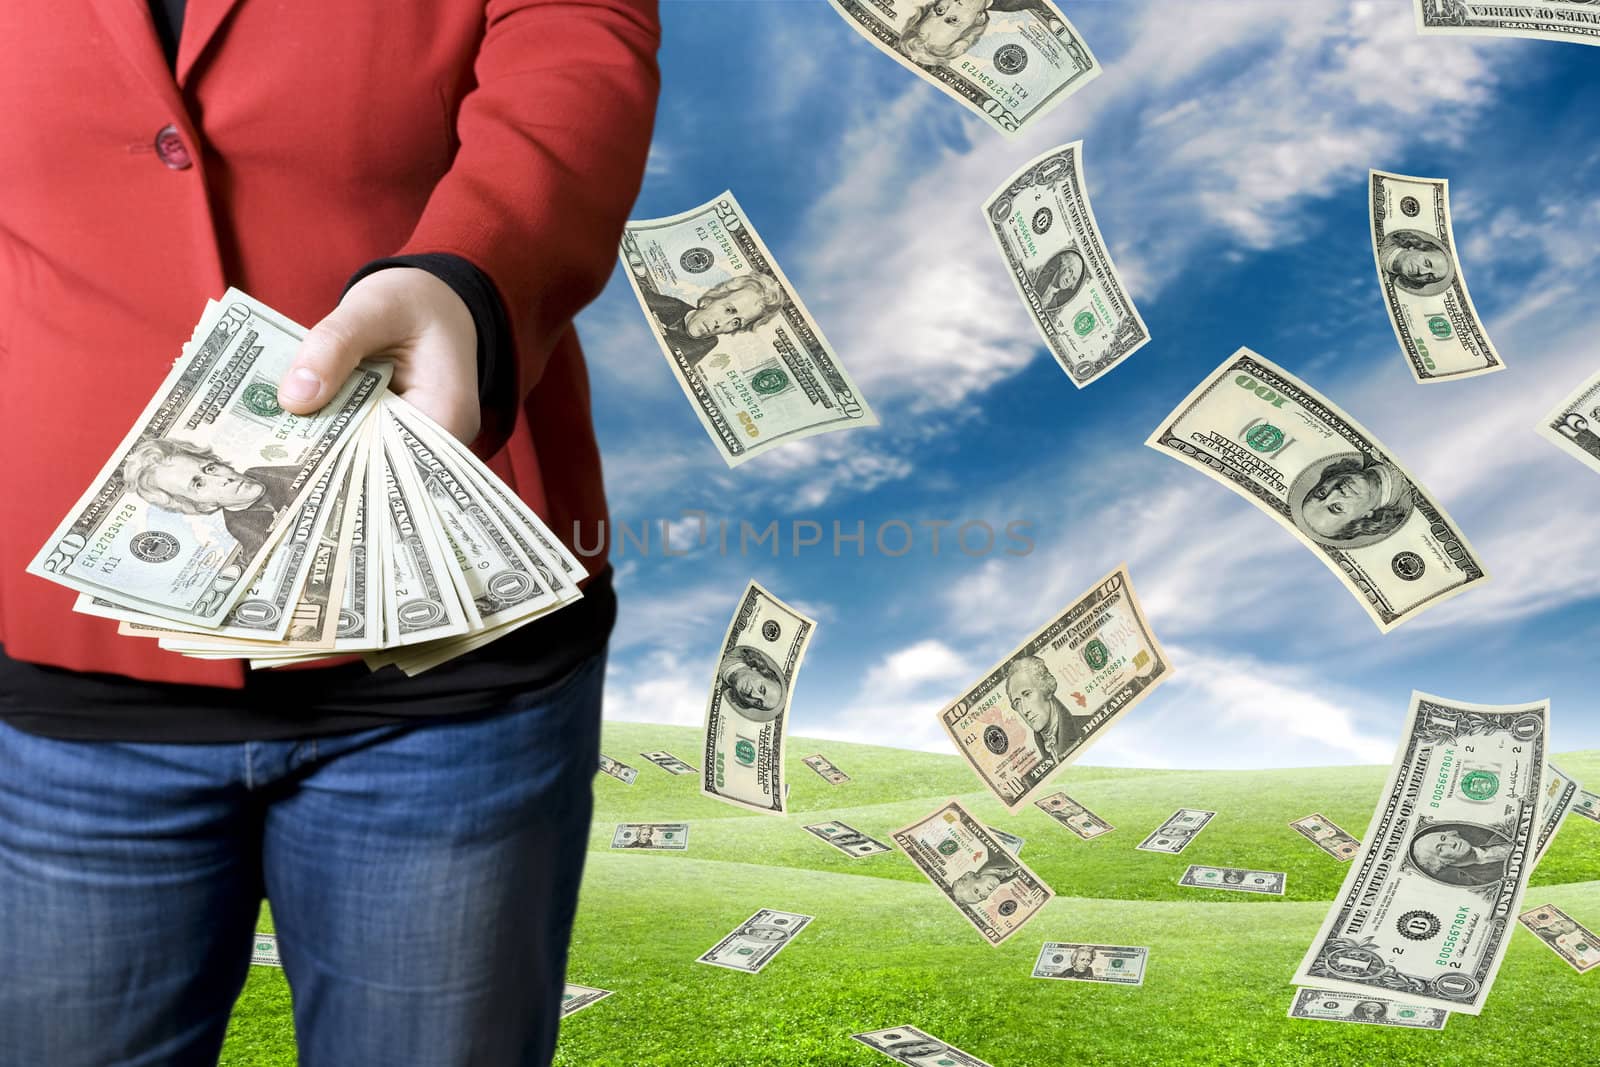 Girl dressed in a red dress and jeans picking up money falling from the sky and showing it.

Studio shot and composite.